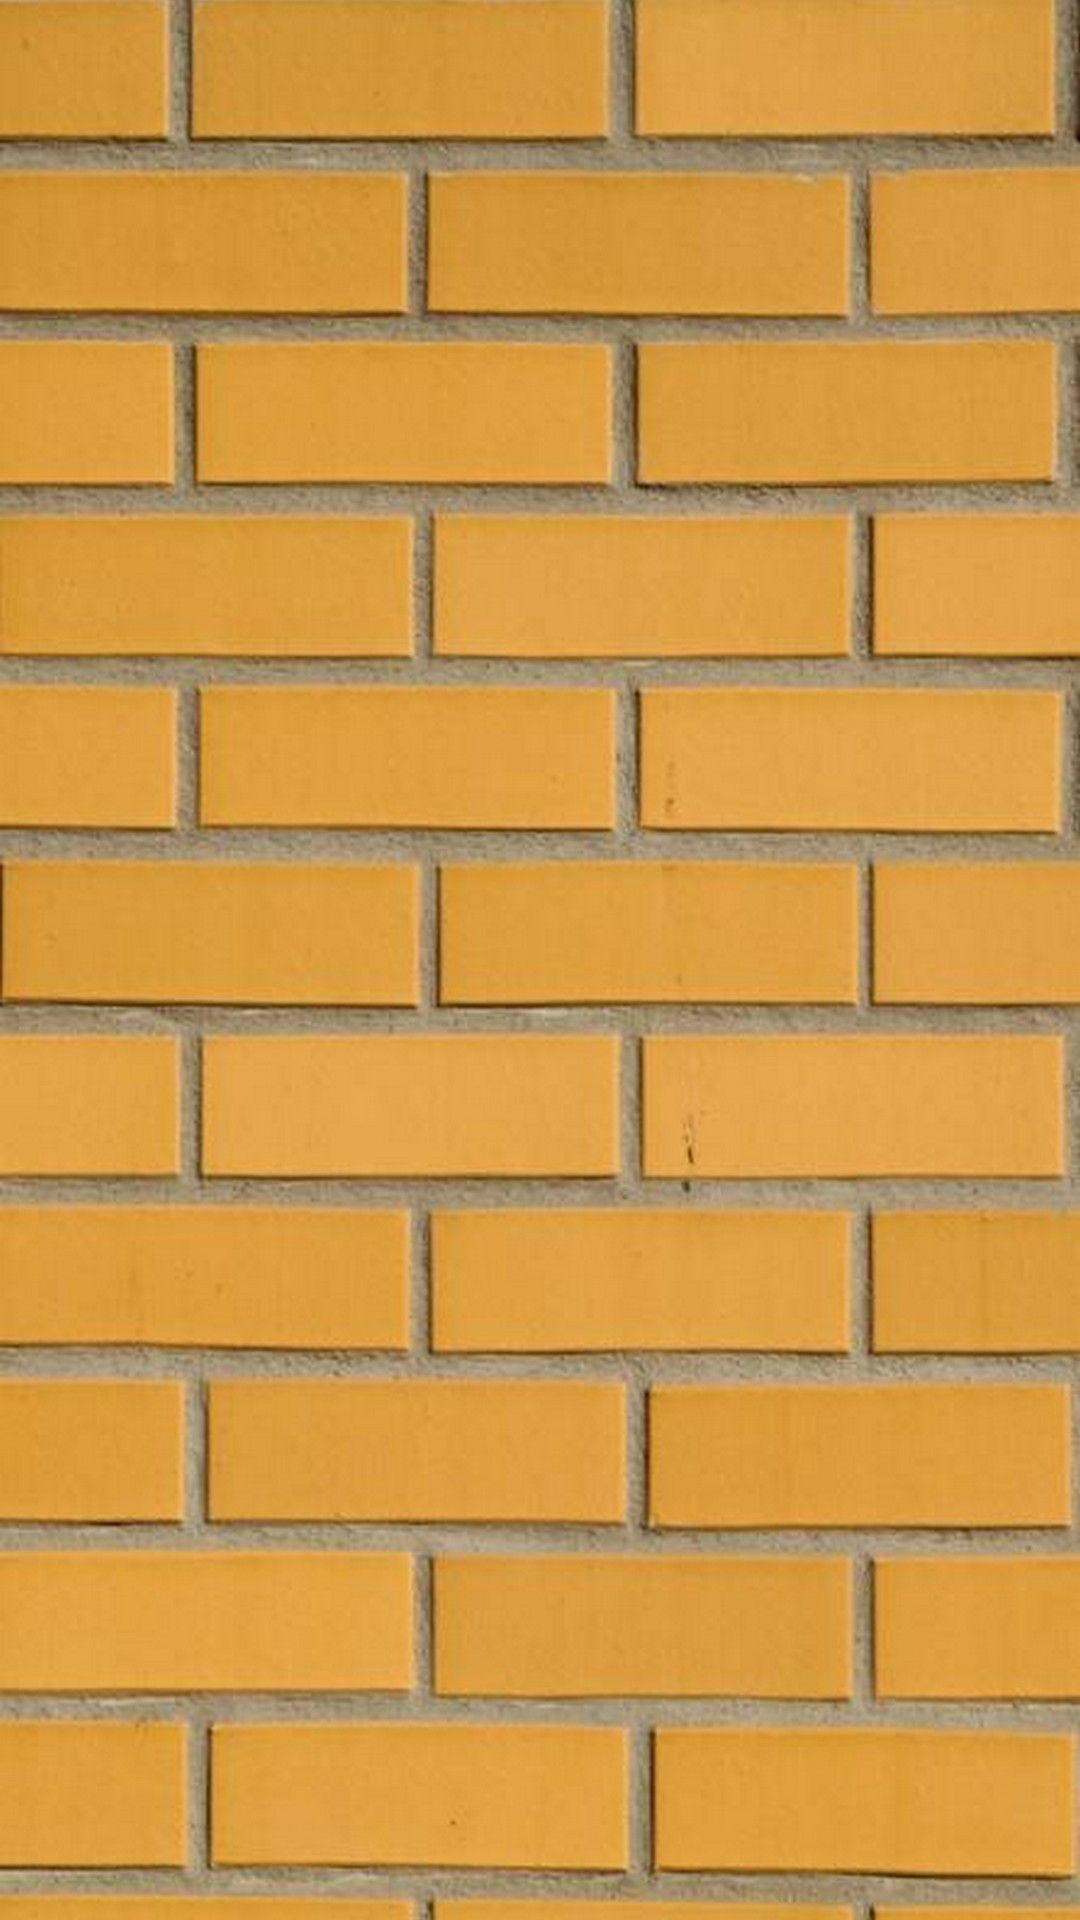 IPhone wallpaper with a yellow brick wall - Yellow